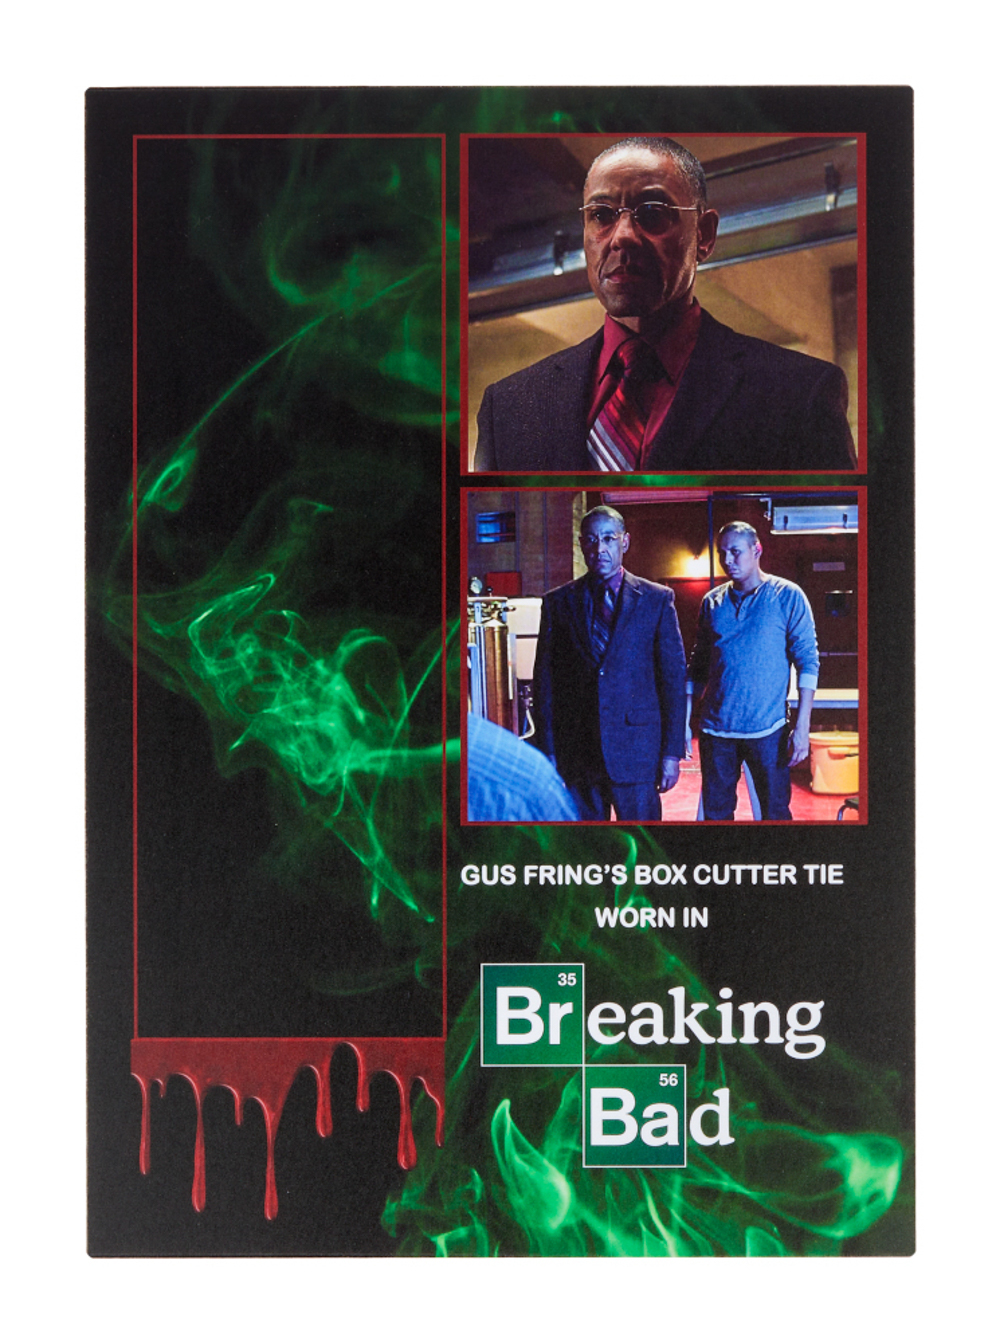 BREAKING BAD | GIANCARLO ESPOSITO "GUS FRING" TIE WITH DISPLAY BOARD - Image 4 of 5